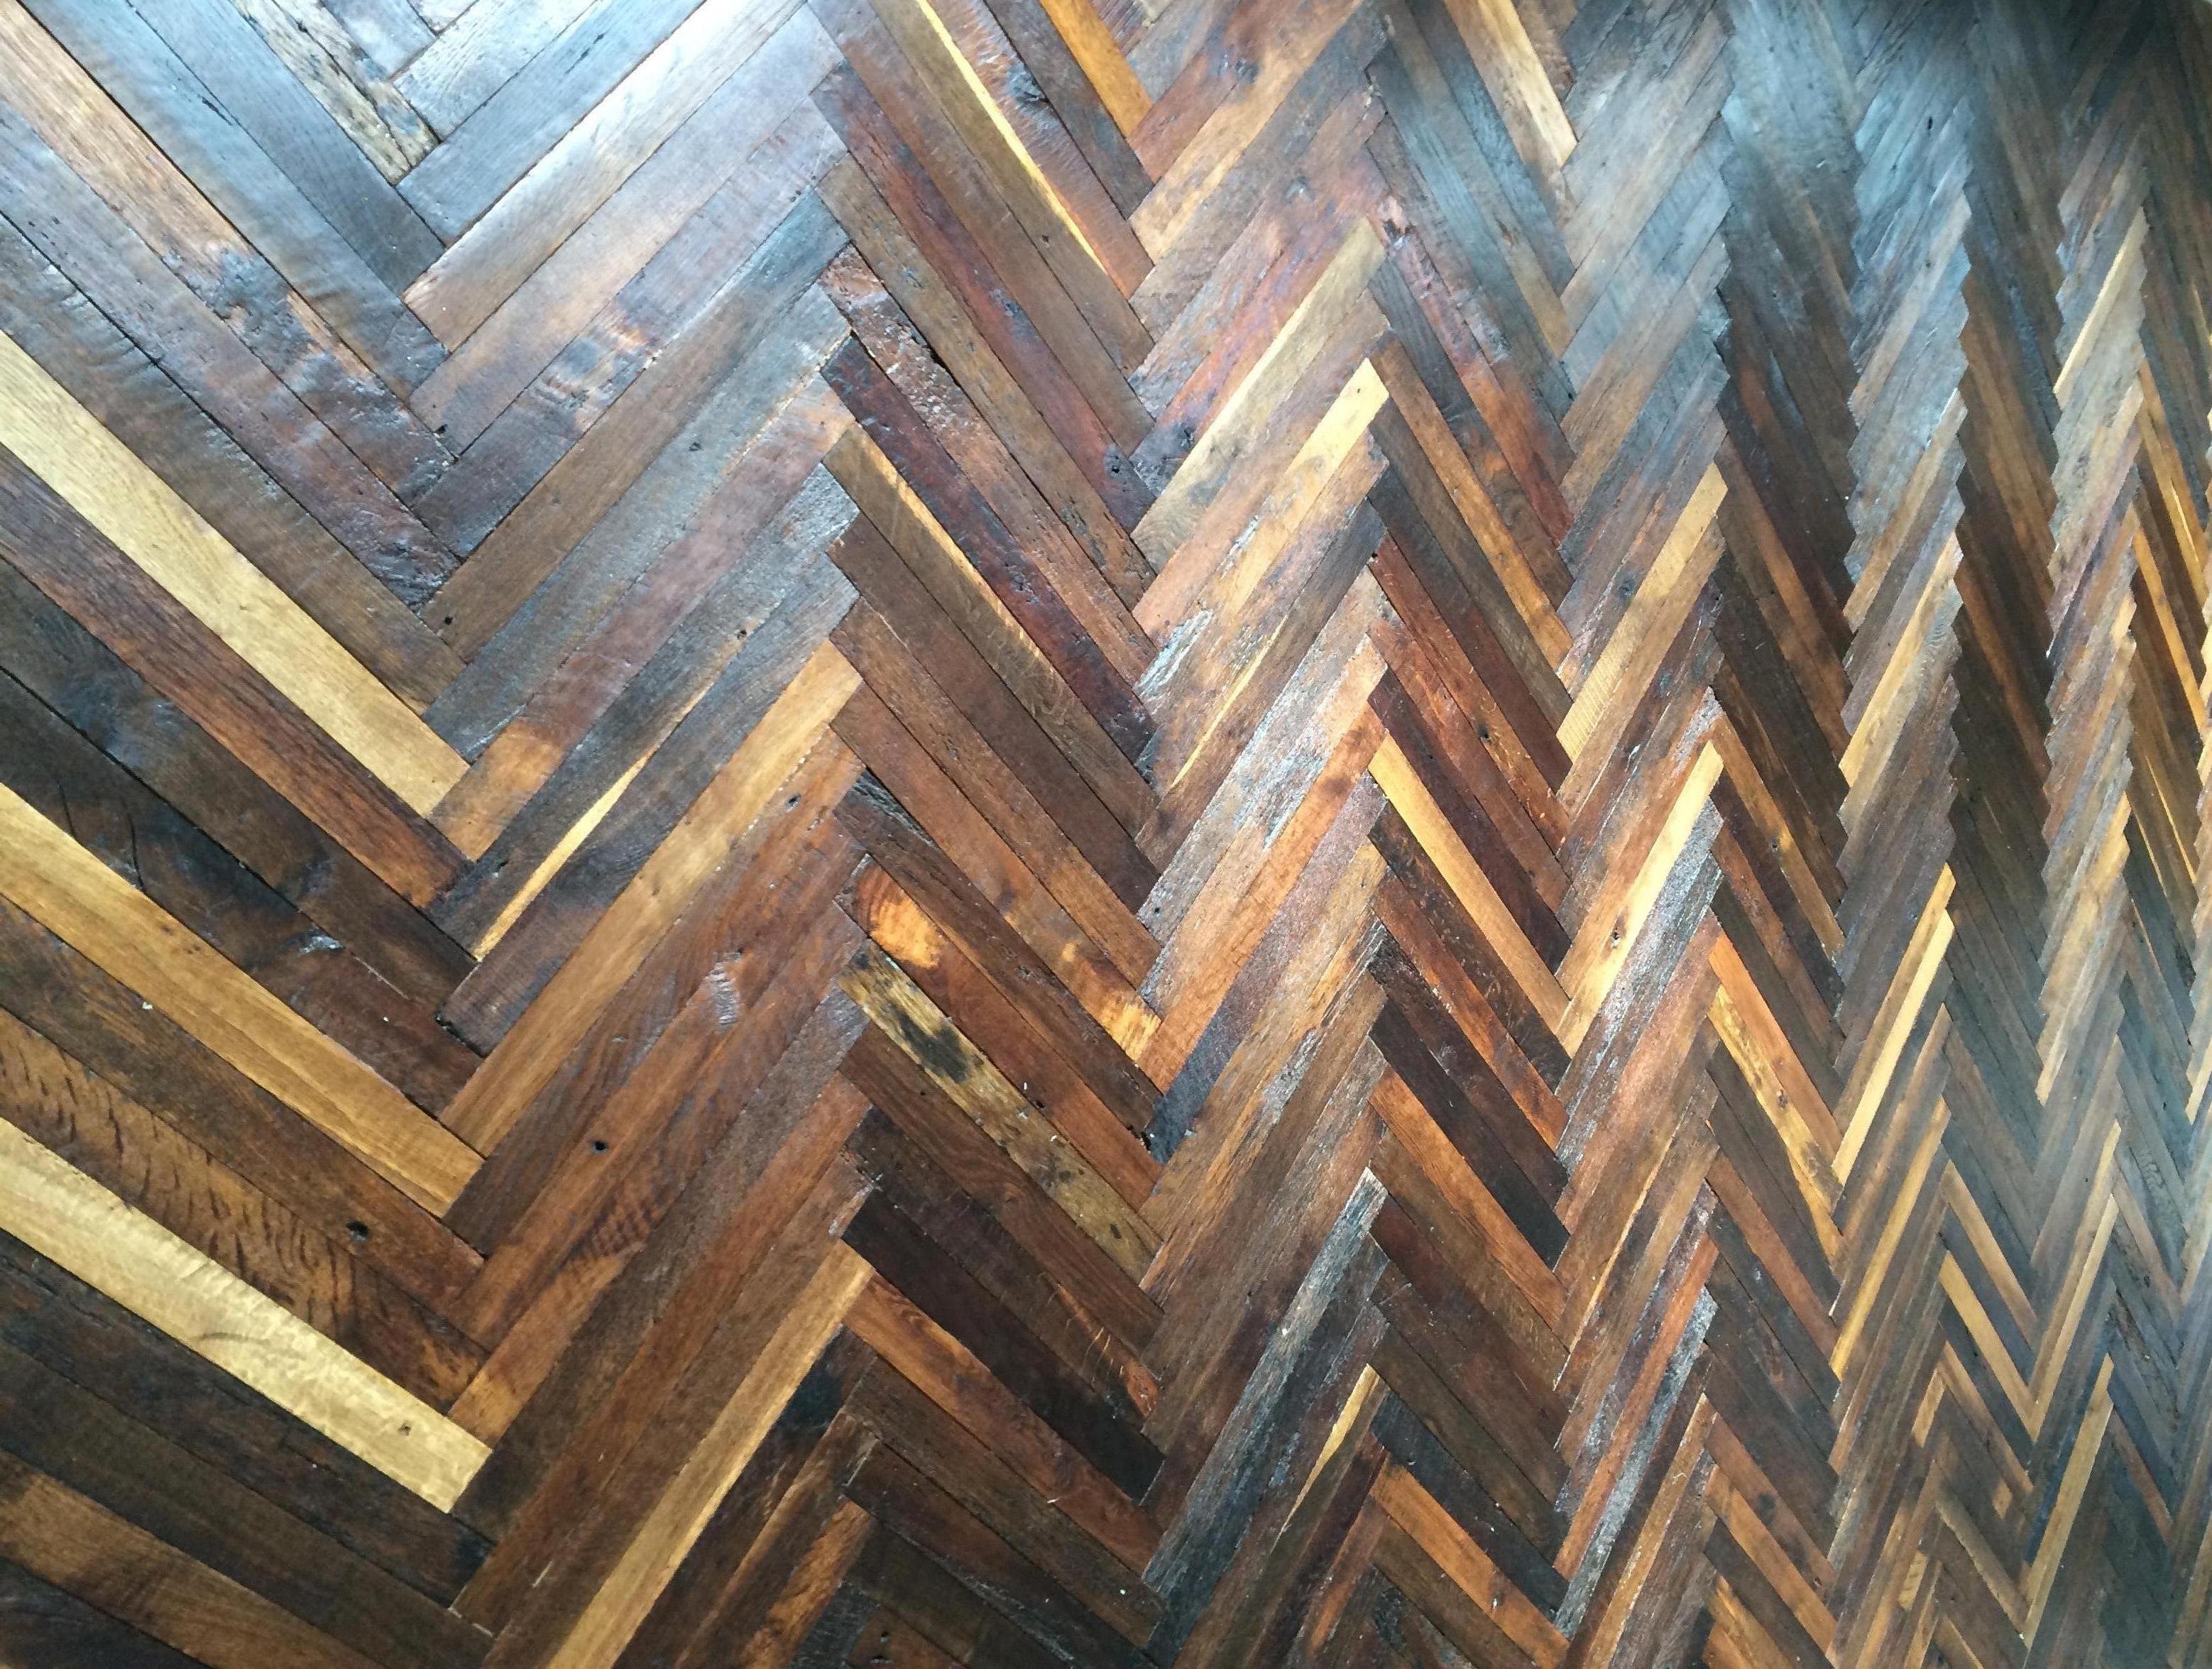 French antique solid wood oak herringbone pattern from France, 18th century.
Possible to customize on the dimensions of each piece, handcrafted with original French antique solid wood oak planks.
Hand-made with original authentic French antique wood